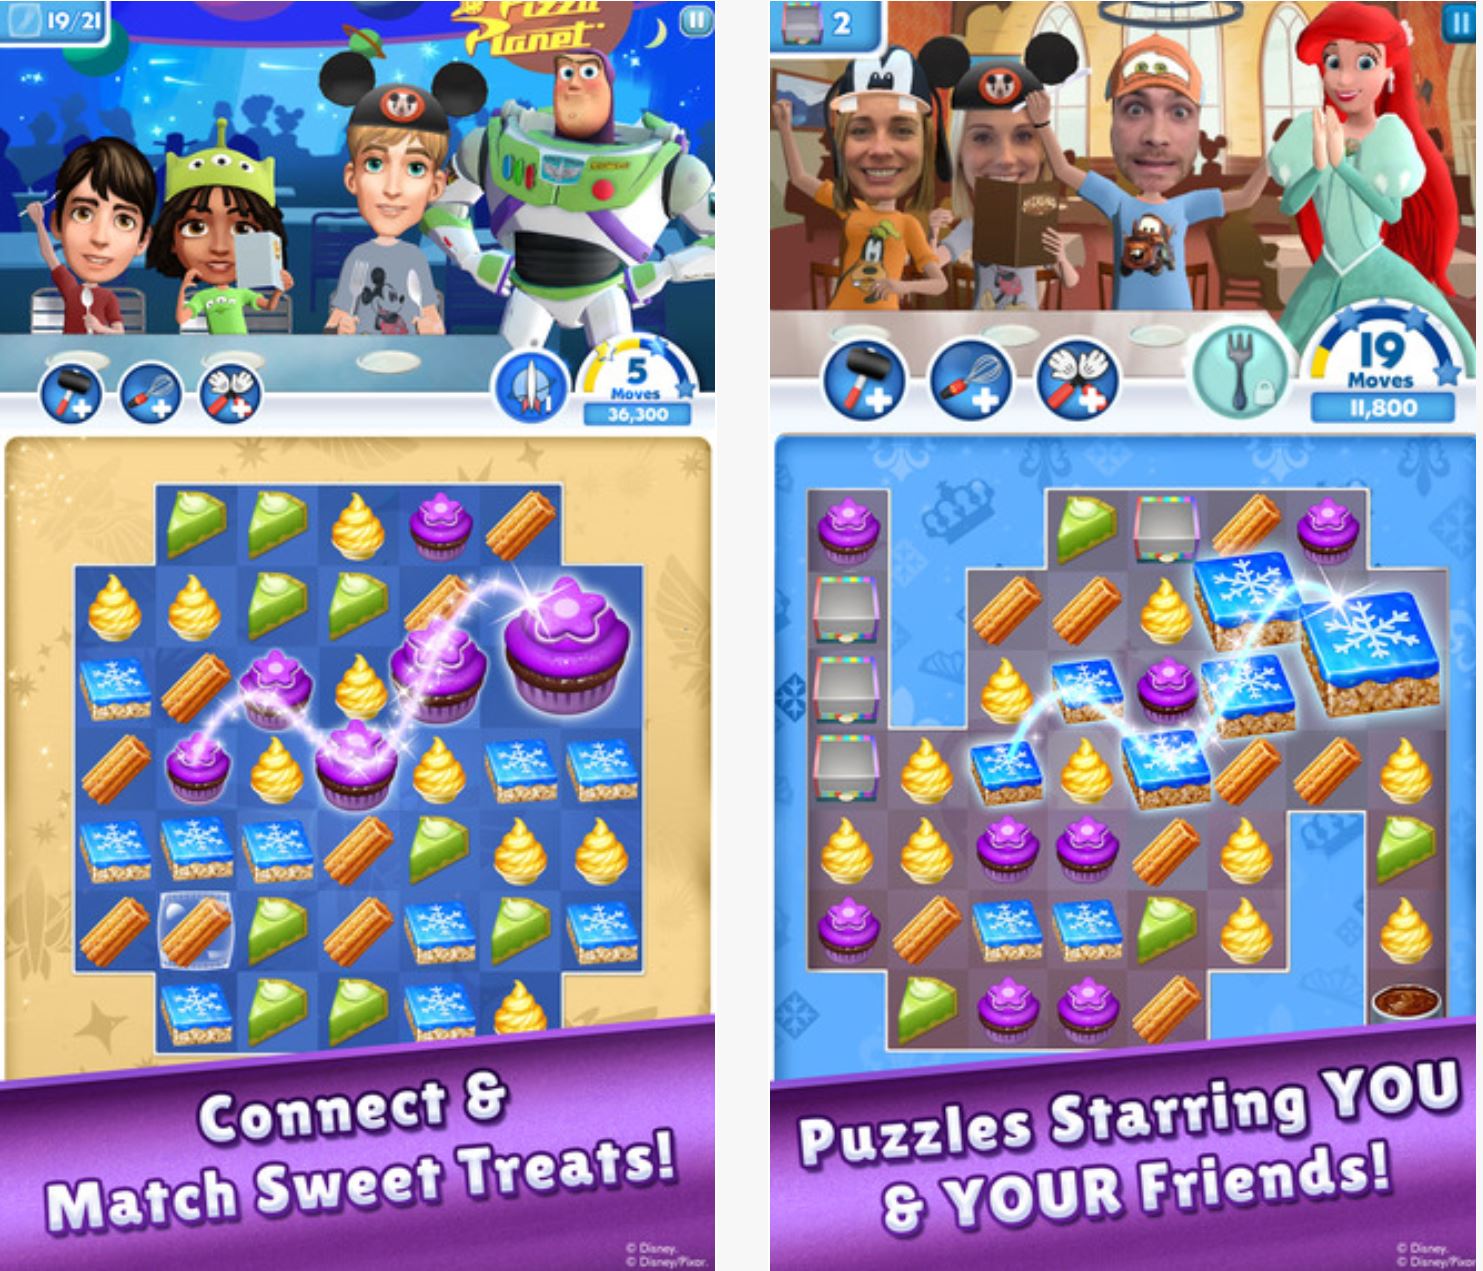 Disney Dream Treats Game Now Available For Download On Windows Phone Devices